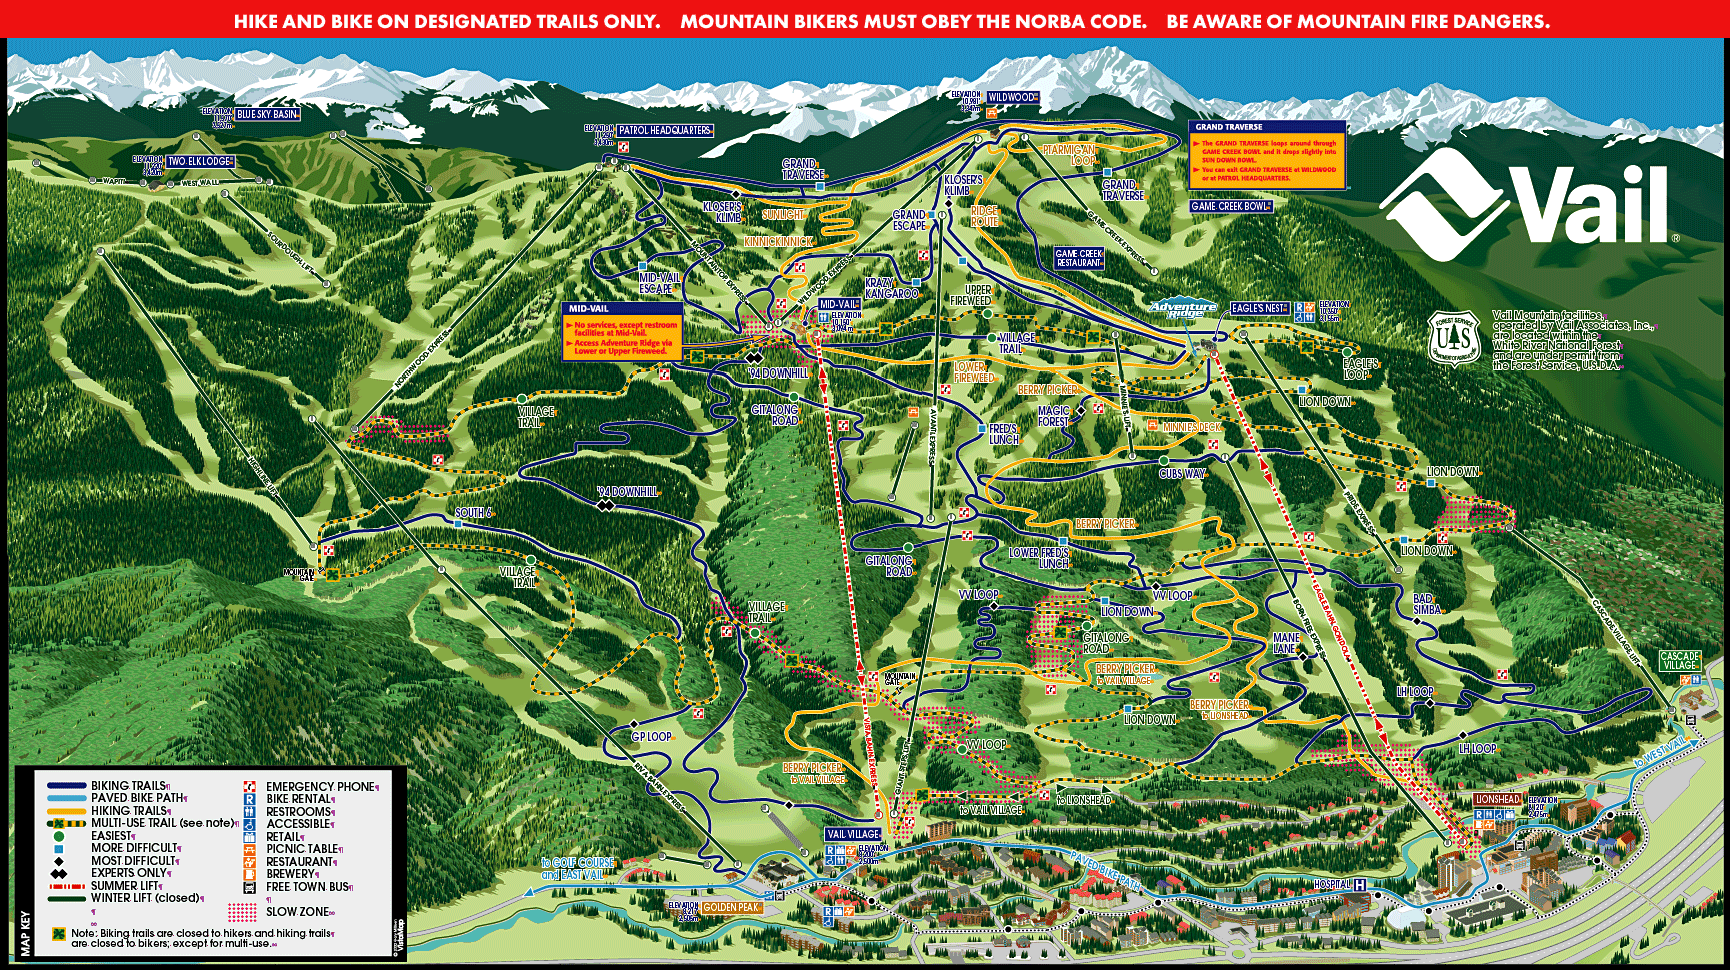 Vail Hiking Trail Map - TravelsFinders.Com.